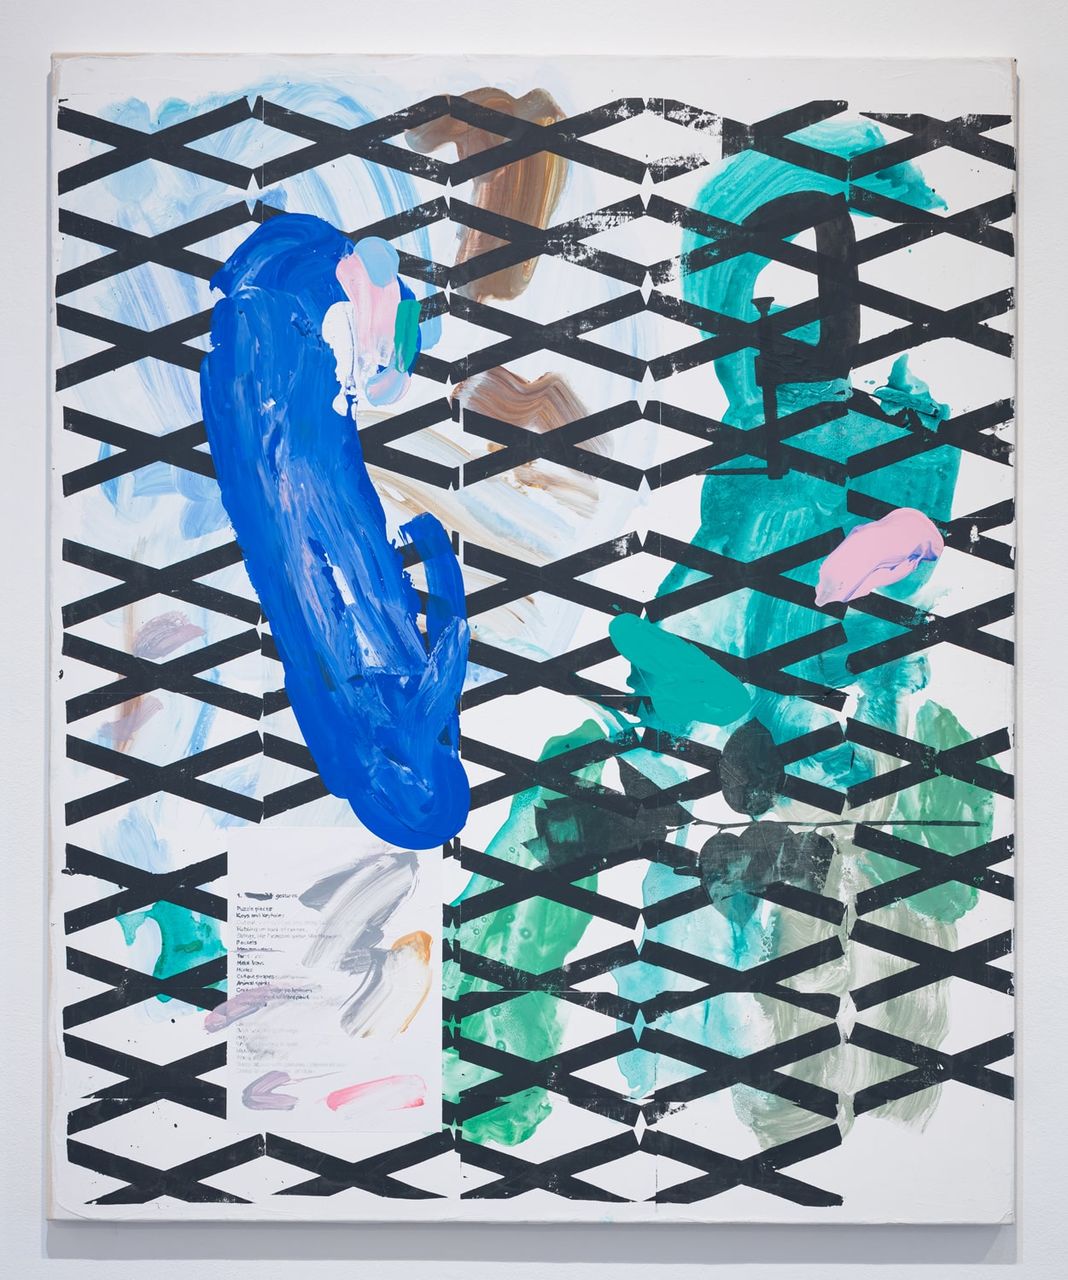 Melissa Gordon, Acrylic, pigment, flache, marble dust, silkscreen, on raw canvas, Female Readymade (Chain-link fence, rope, net, list of financial terms, text on Monsters, two holes, Medusa, (ADD HERE MEL), Jor, 2022